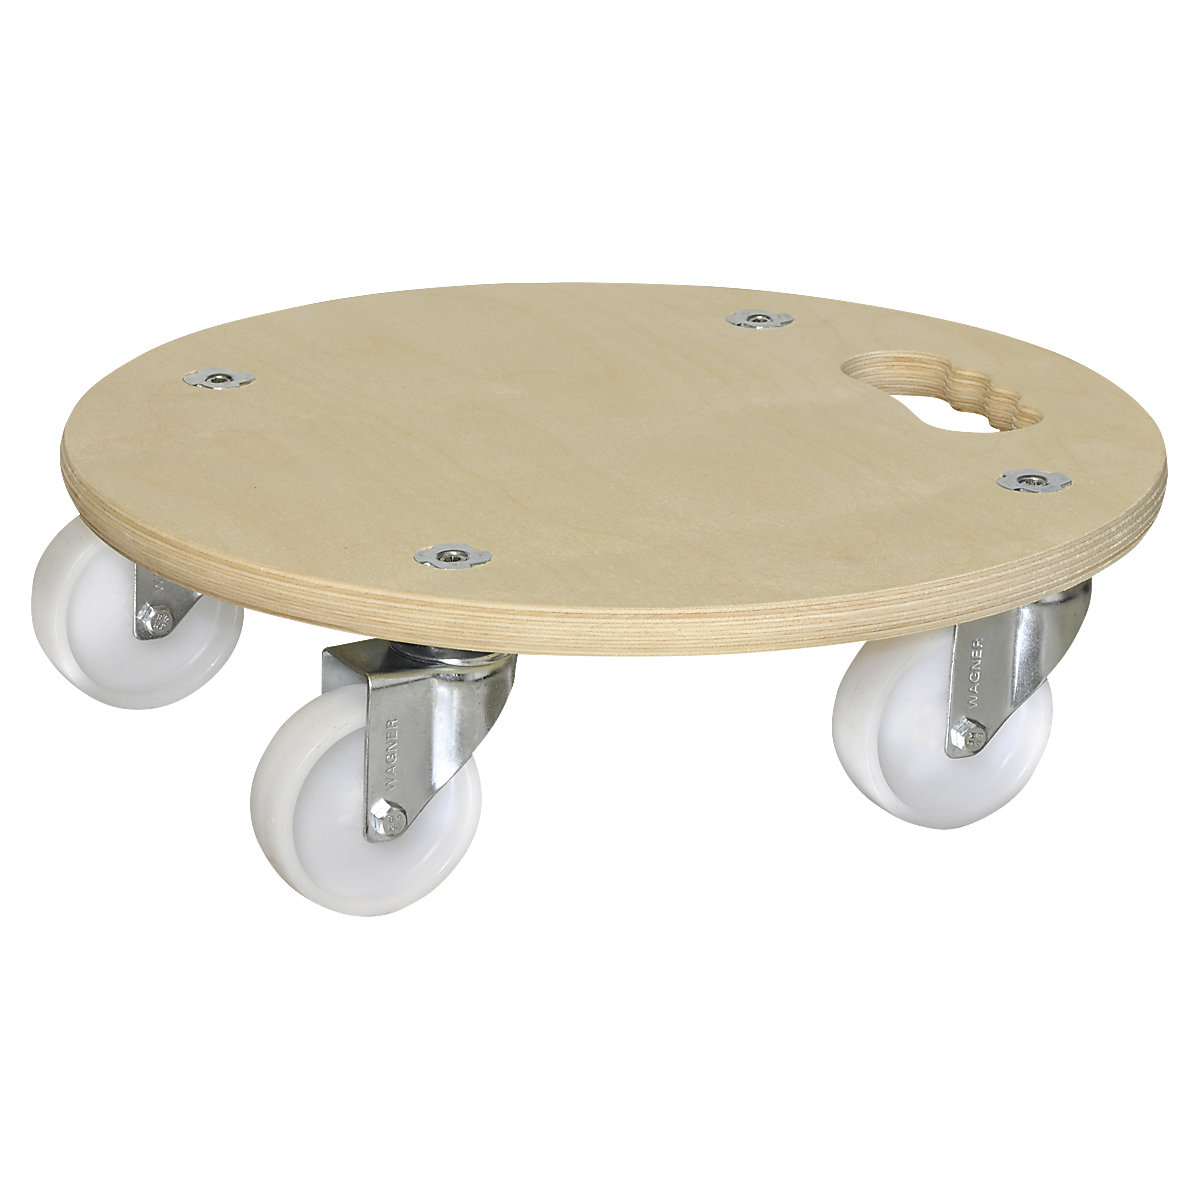 MM 1137 transport dolly, round – Wagner, Ø 380 mm, max. load 250 kg, 2+ items-3